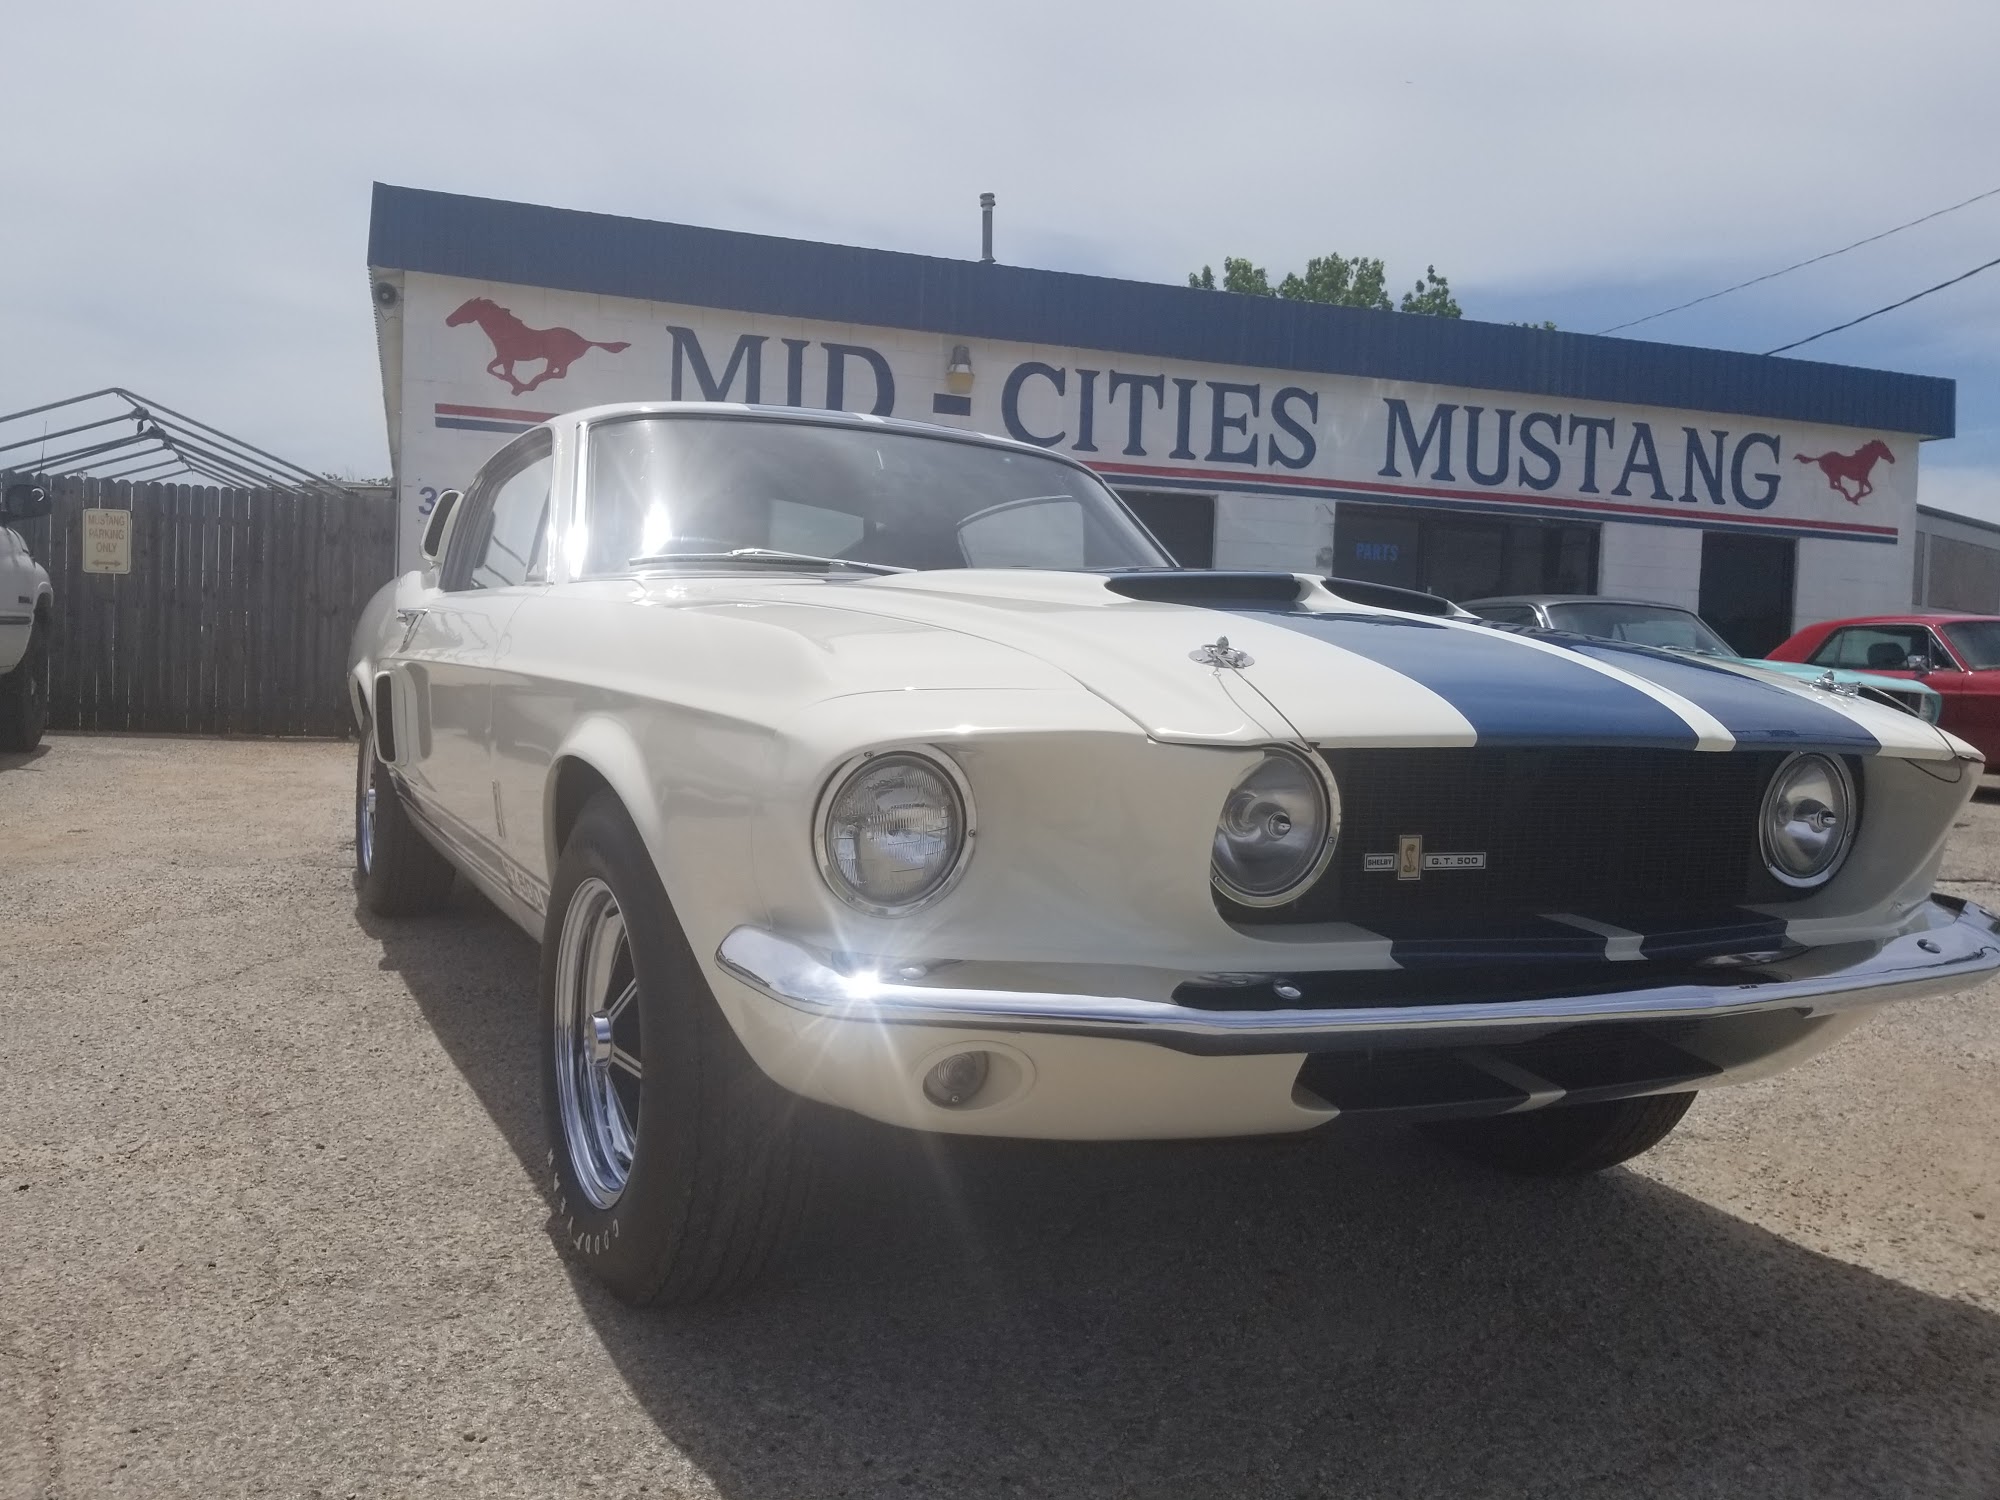 Mid-Cities Mustang